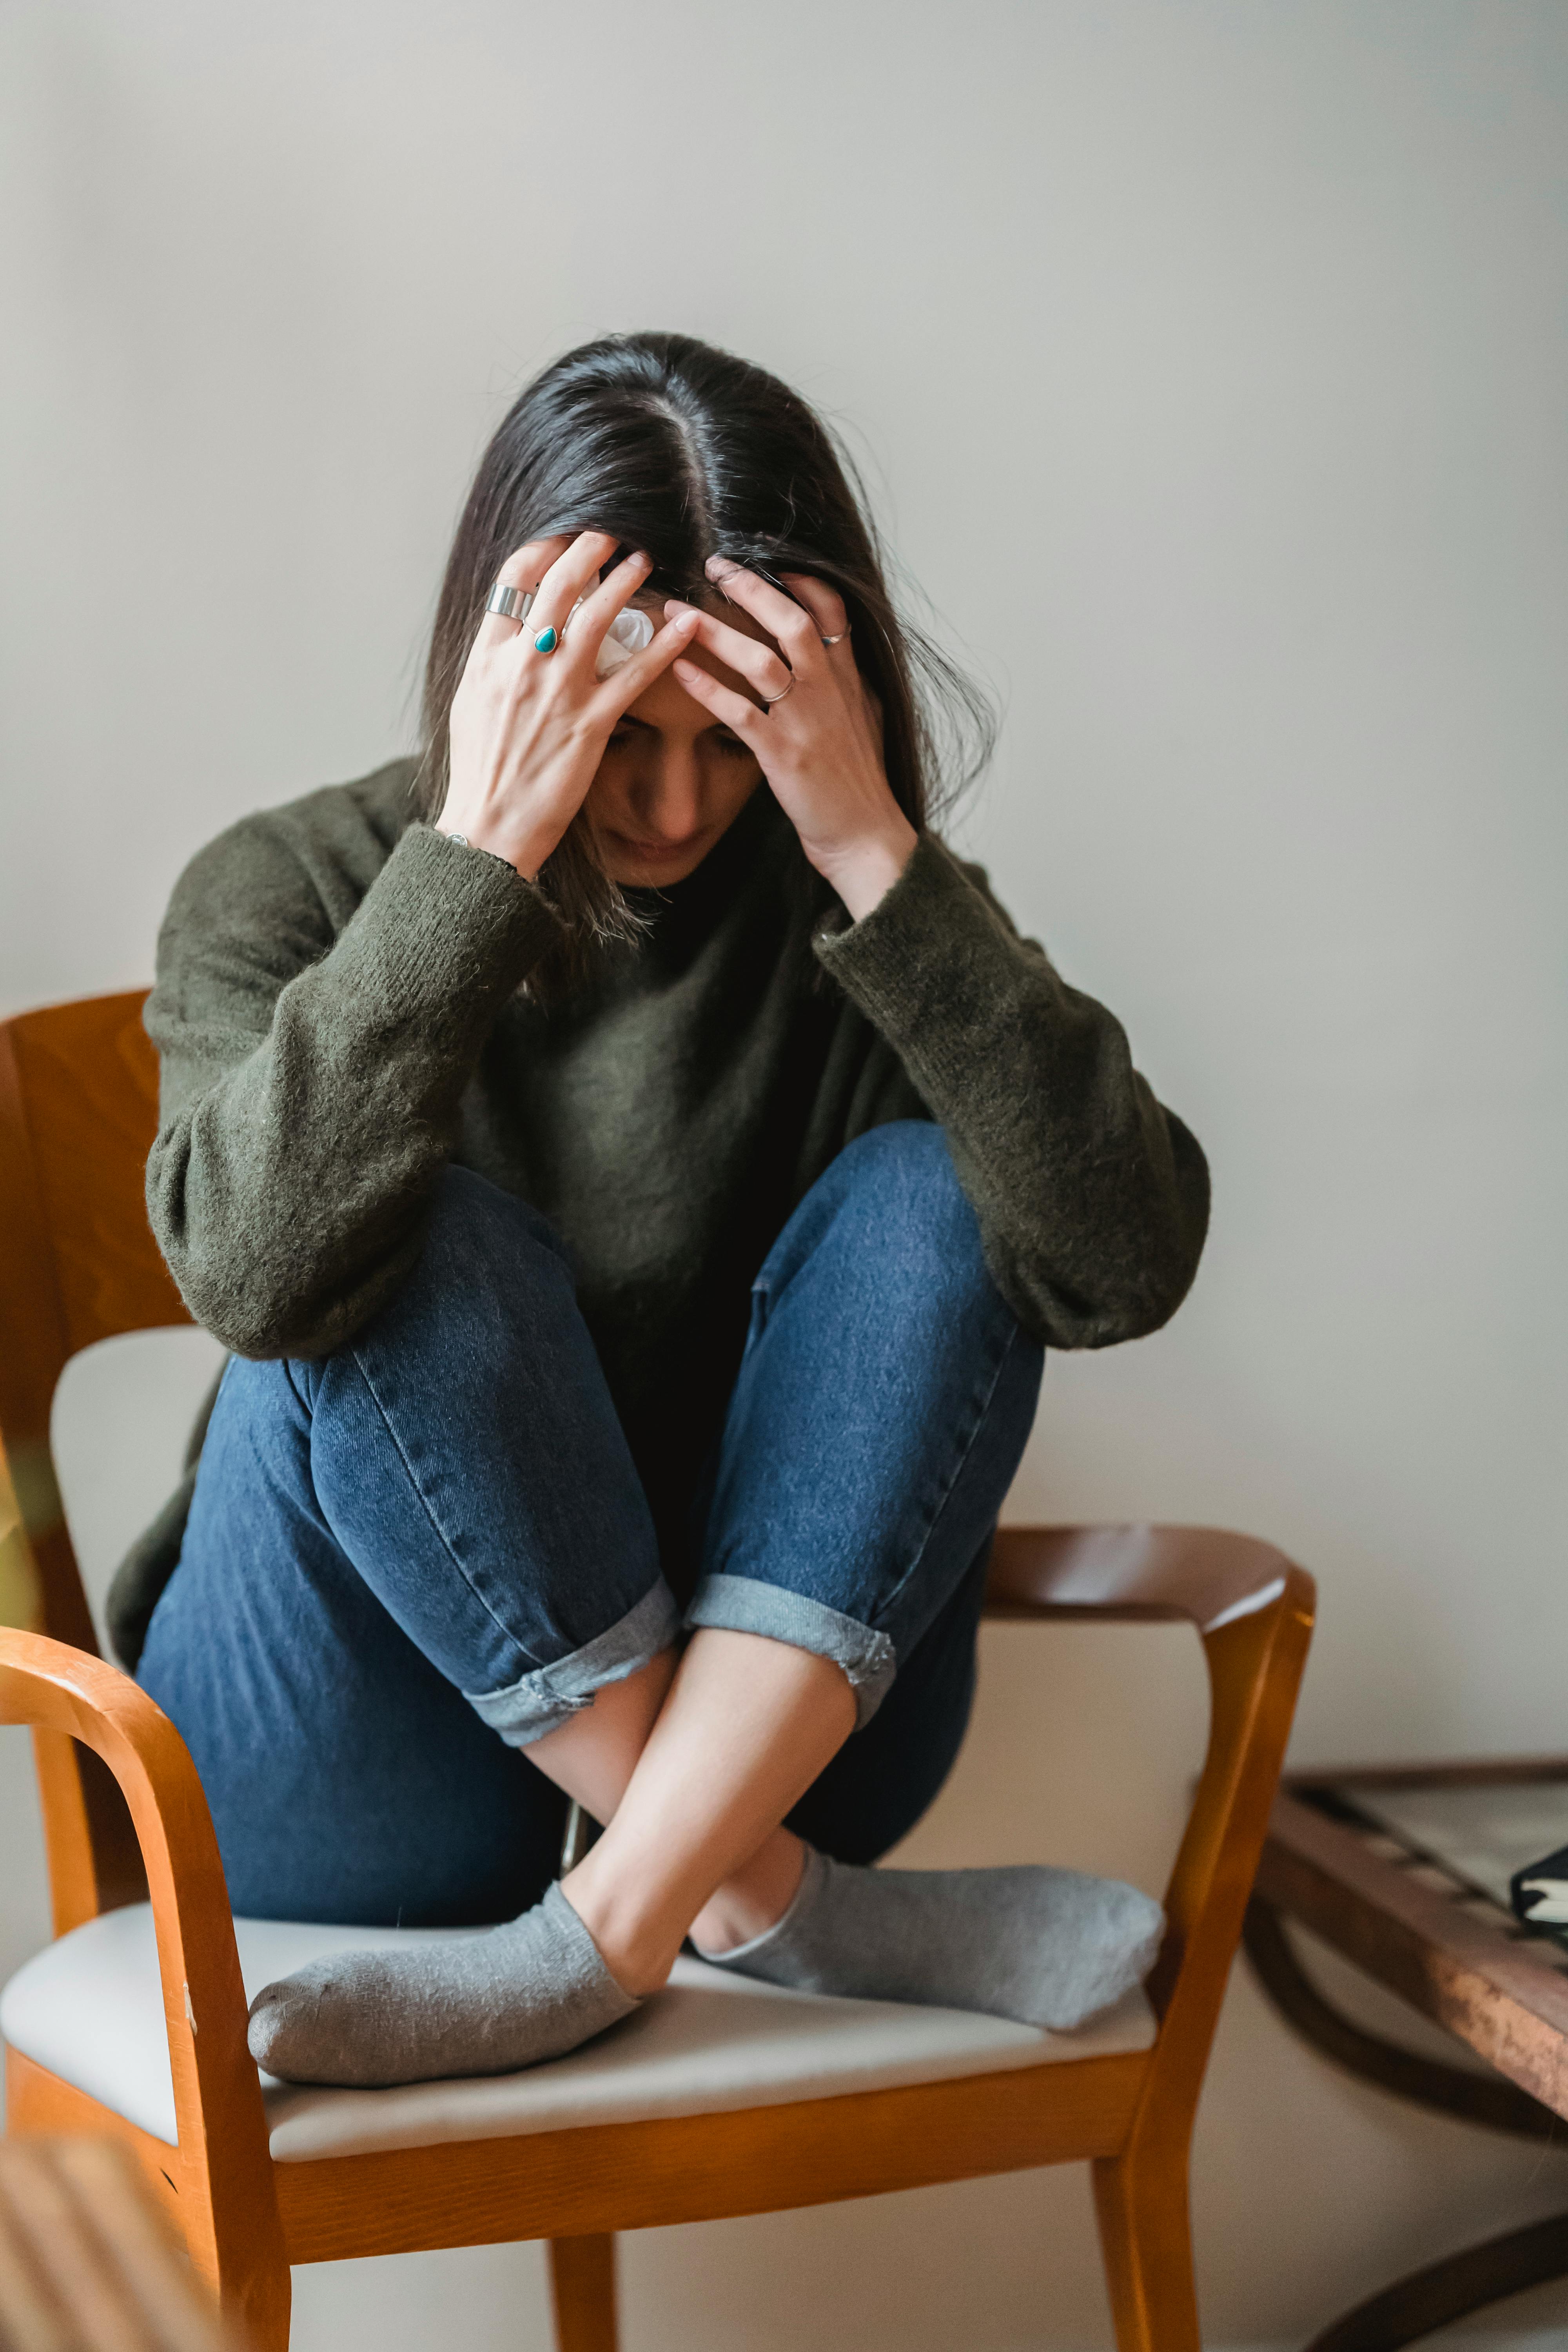 A young woman grabbing her head while sitting on a chair | Source: Pexels